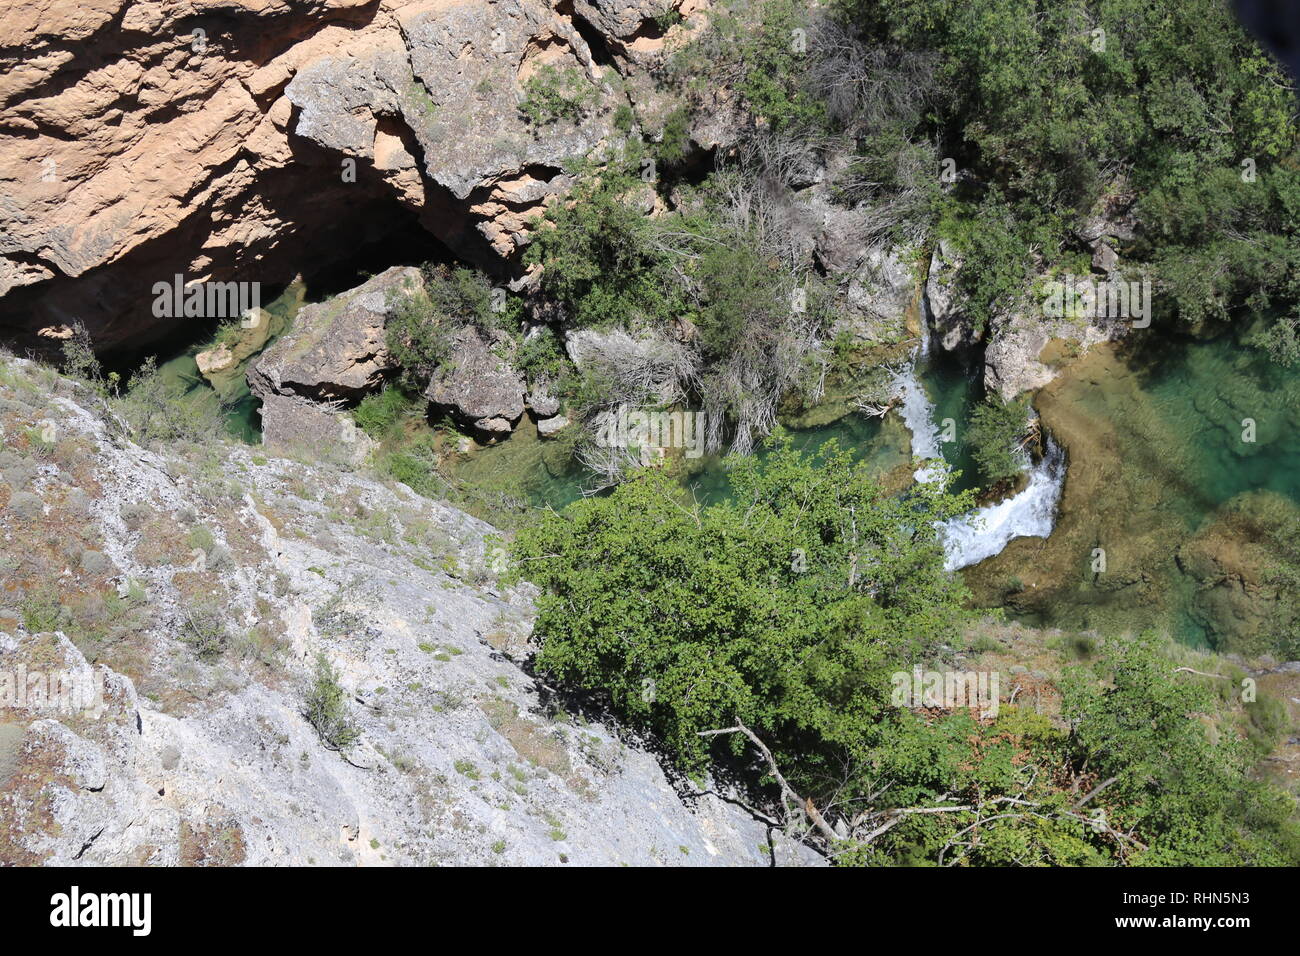 A flowing body of water on the canyon at Extremadura, Spain Stock Photo